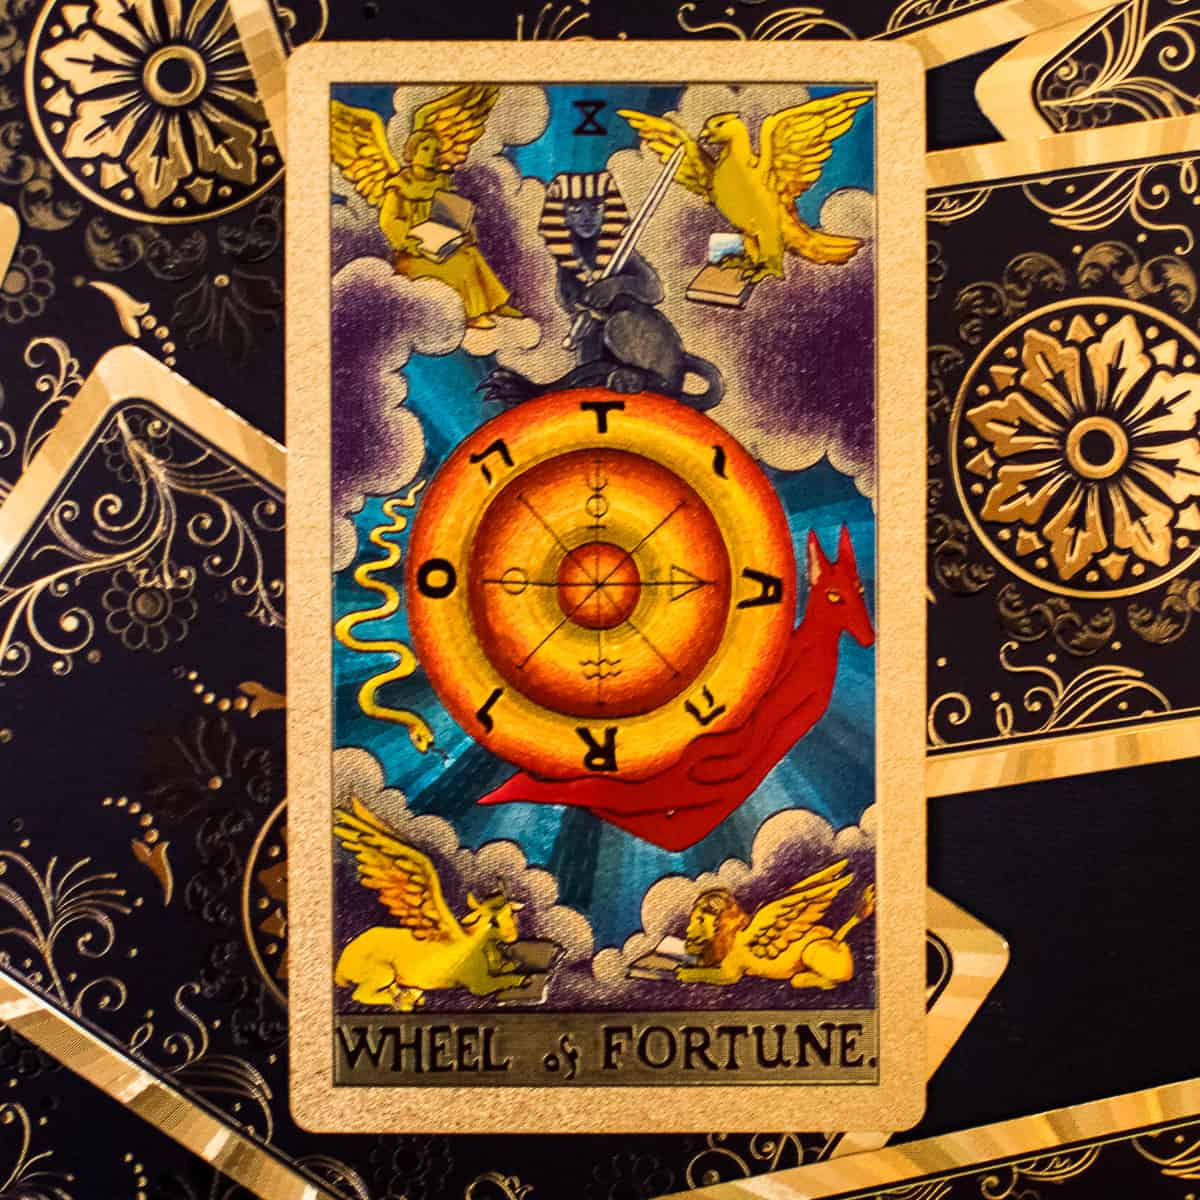 A wheel with all 4 zodiac symbols represented depicted on a tarot card.